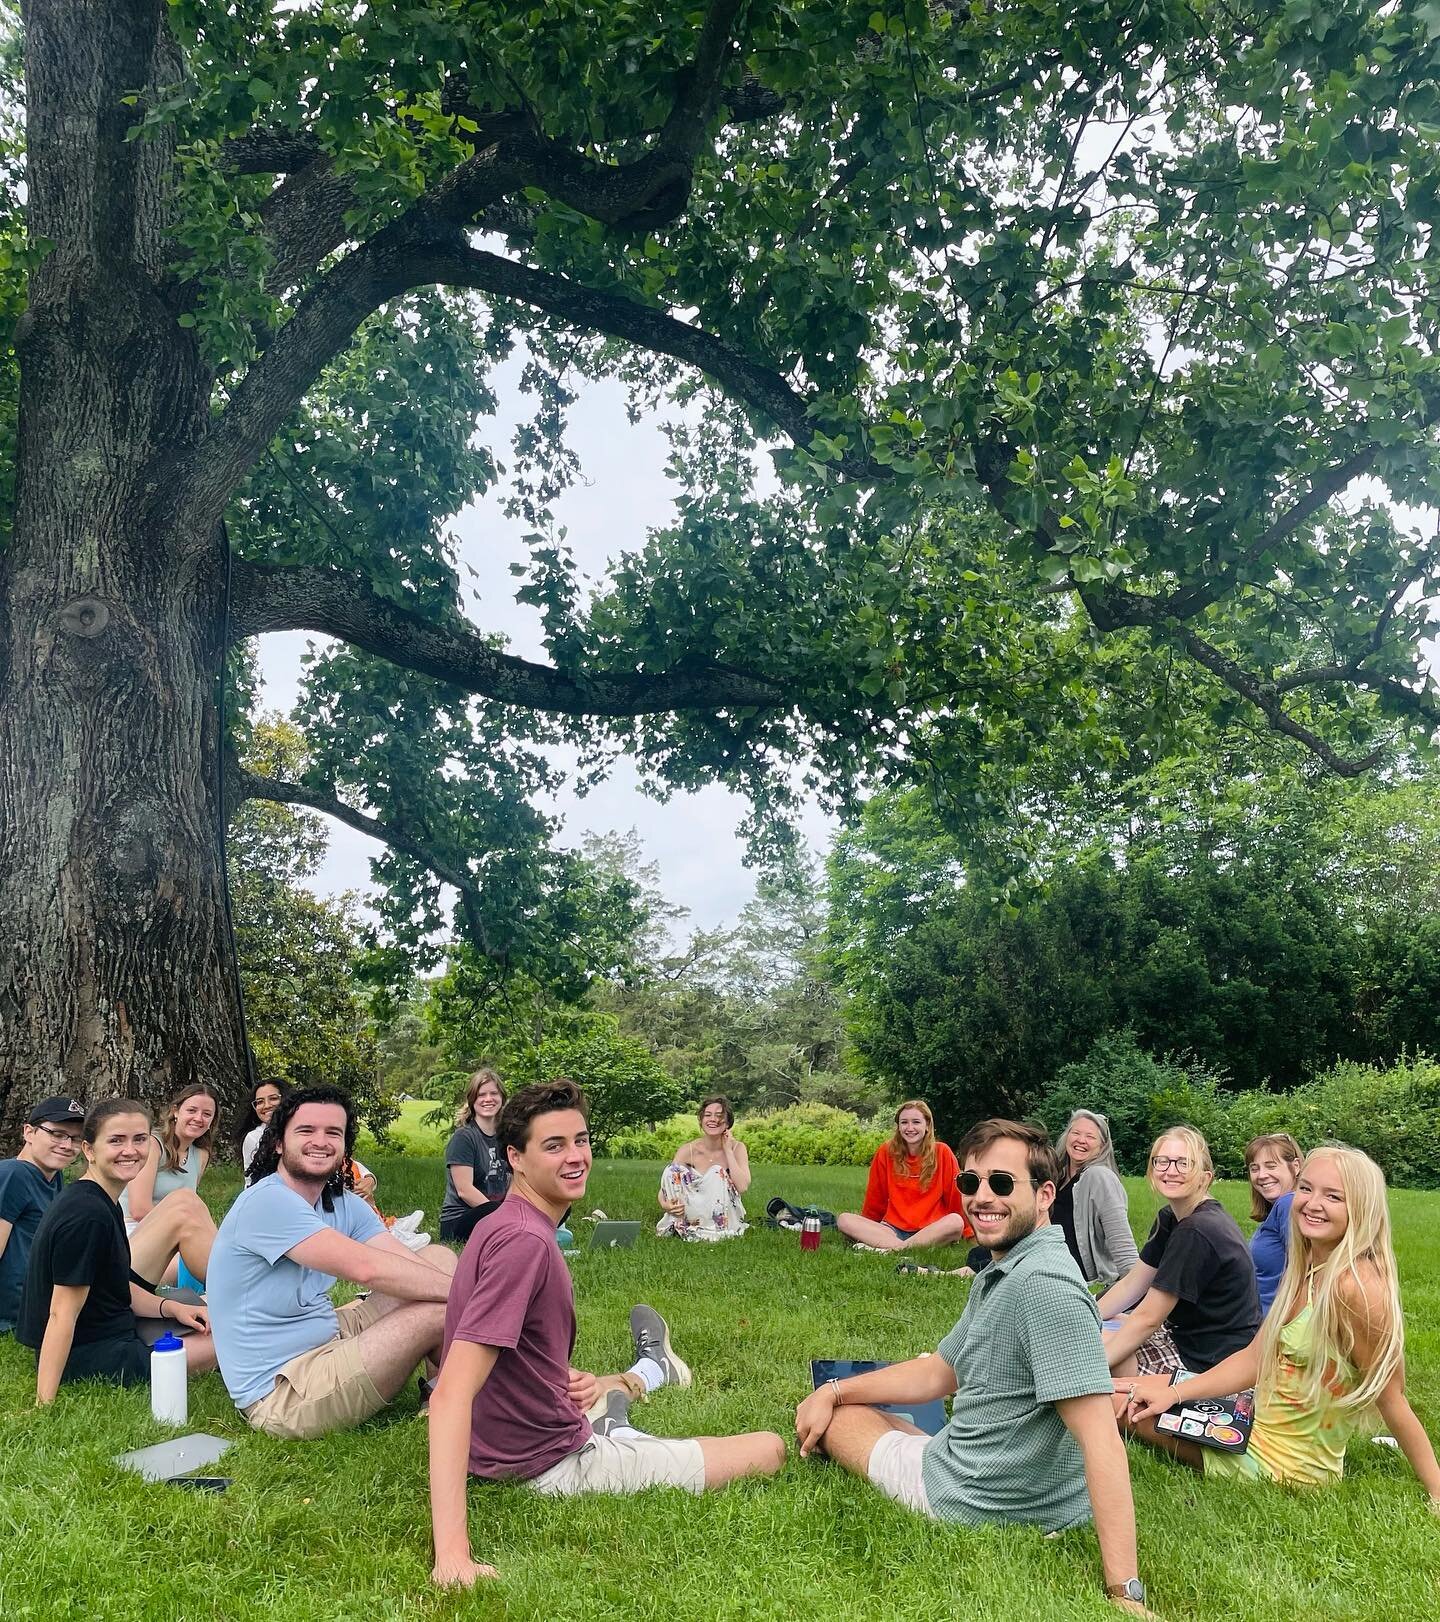 Tomorrow is the very last day of the 2022 Morven Summer Institute, so we are reminiscing on Phoebe Crisman&rsquo;s class adventures in the Gardens in Block A two weeks ago&hellip; We will miss having students studying here every day, but keep an eye 